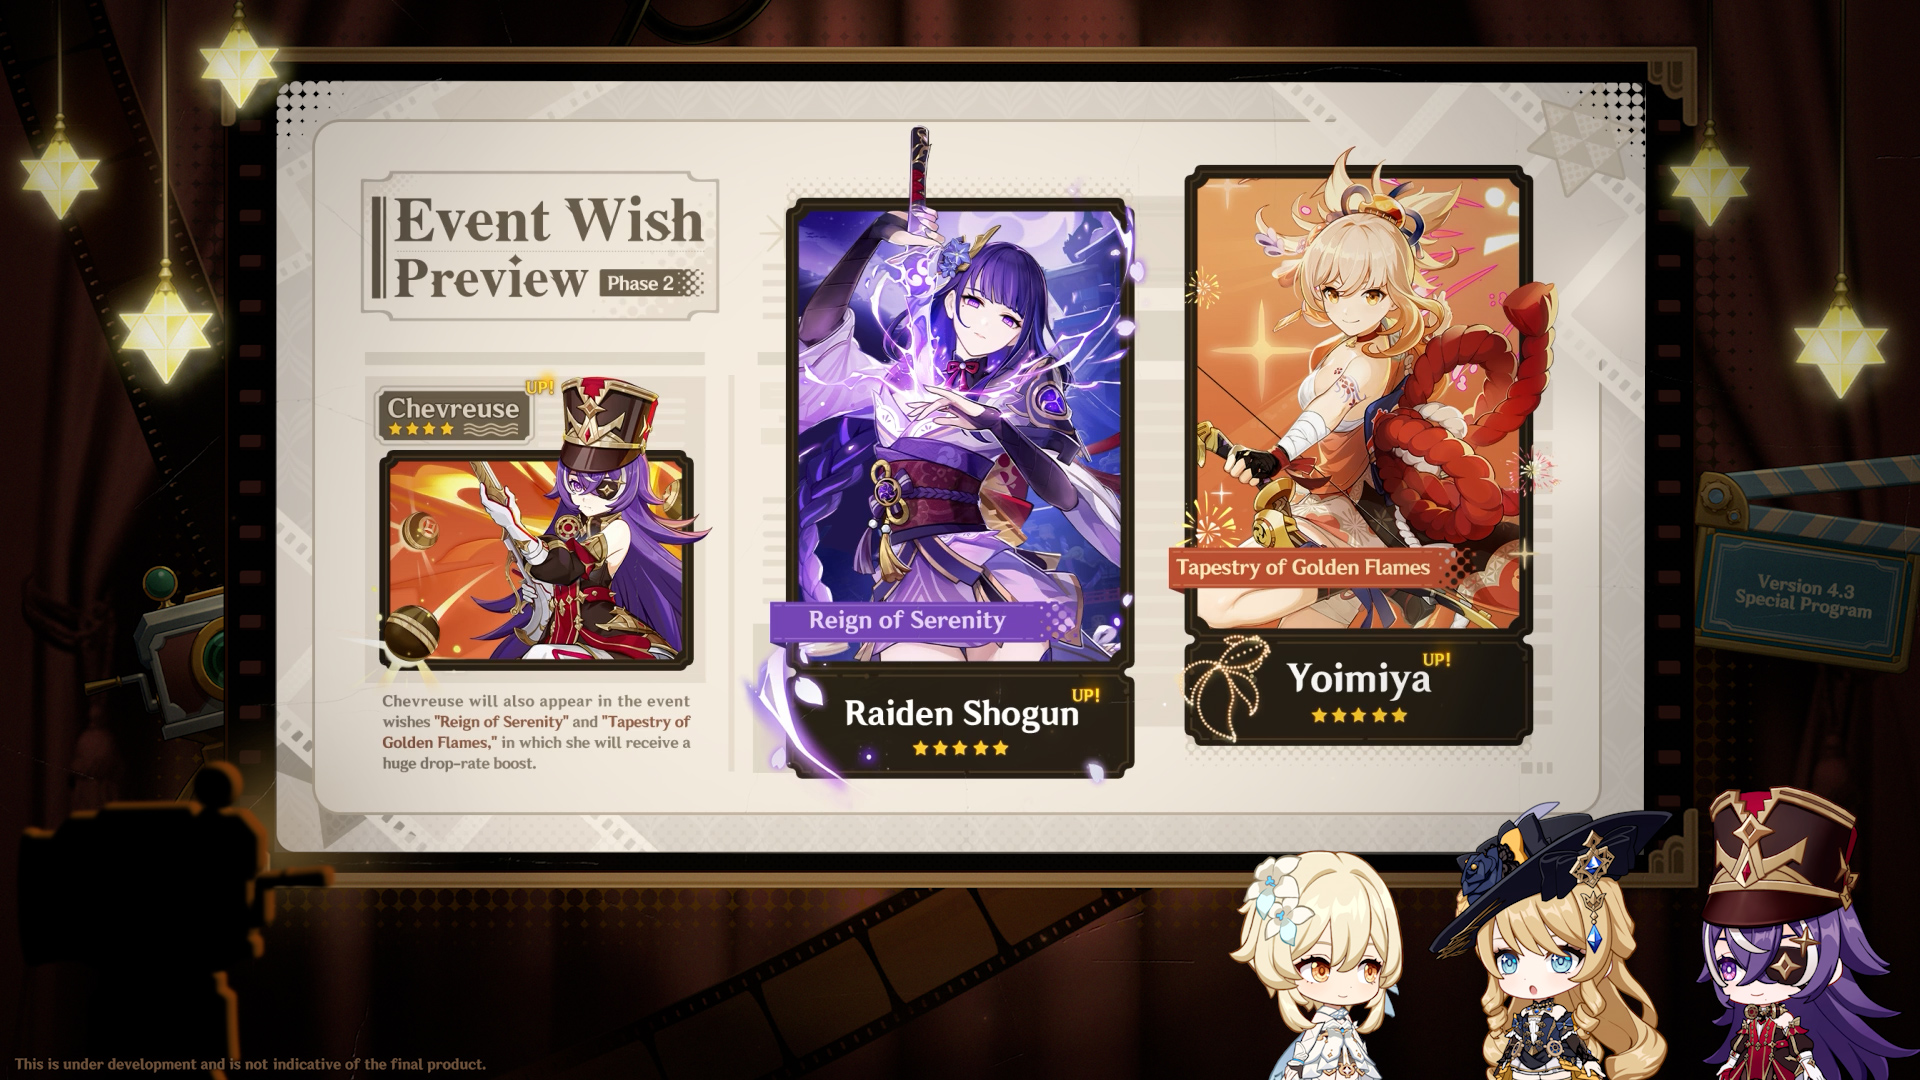 Version 3.7 Event Wishes Notice - Phase II